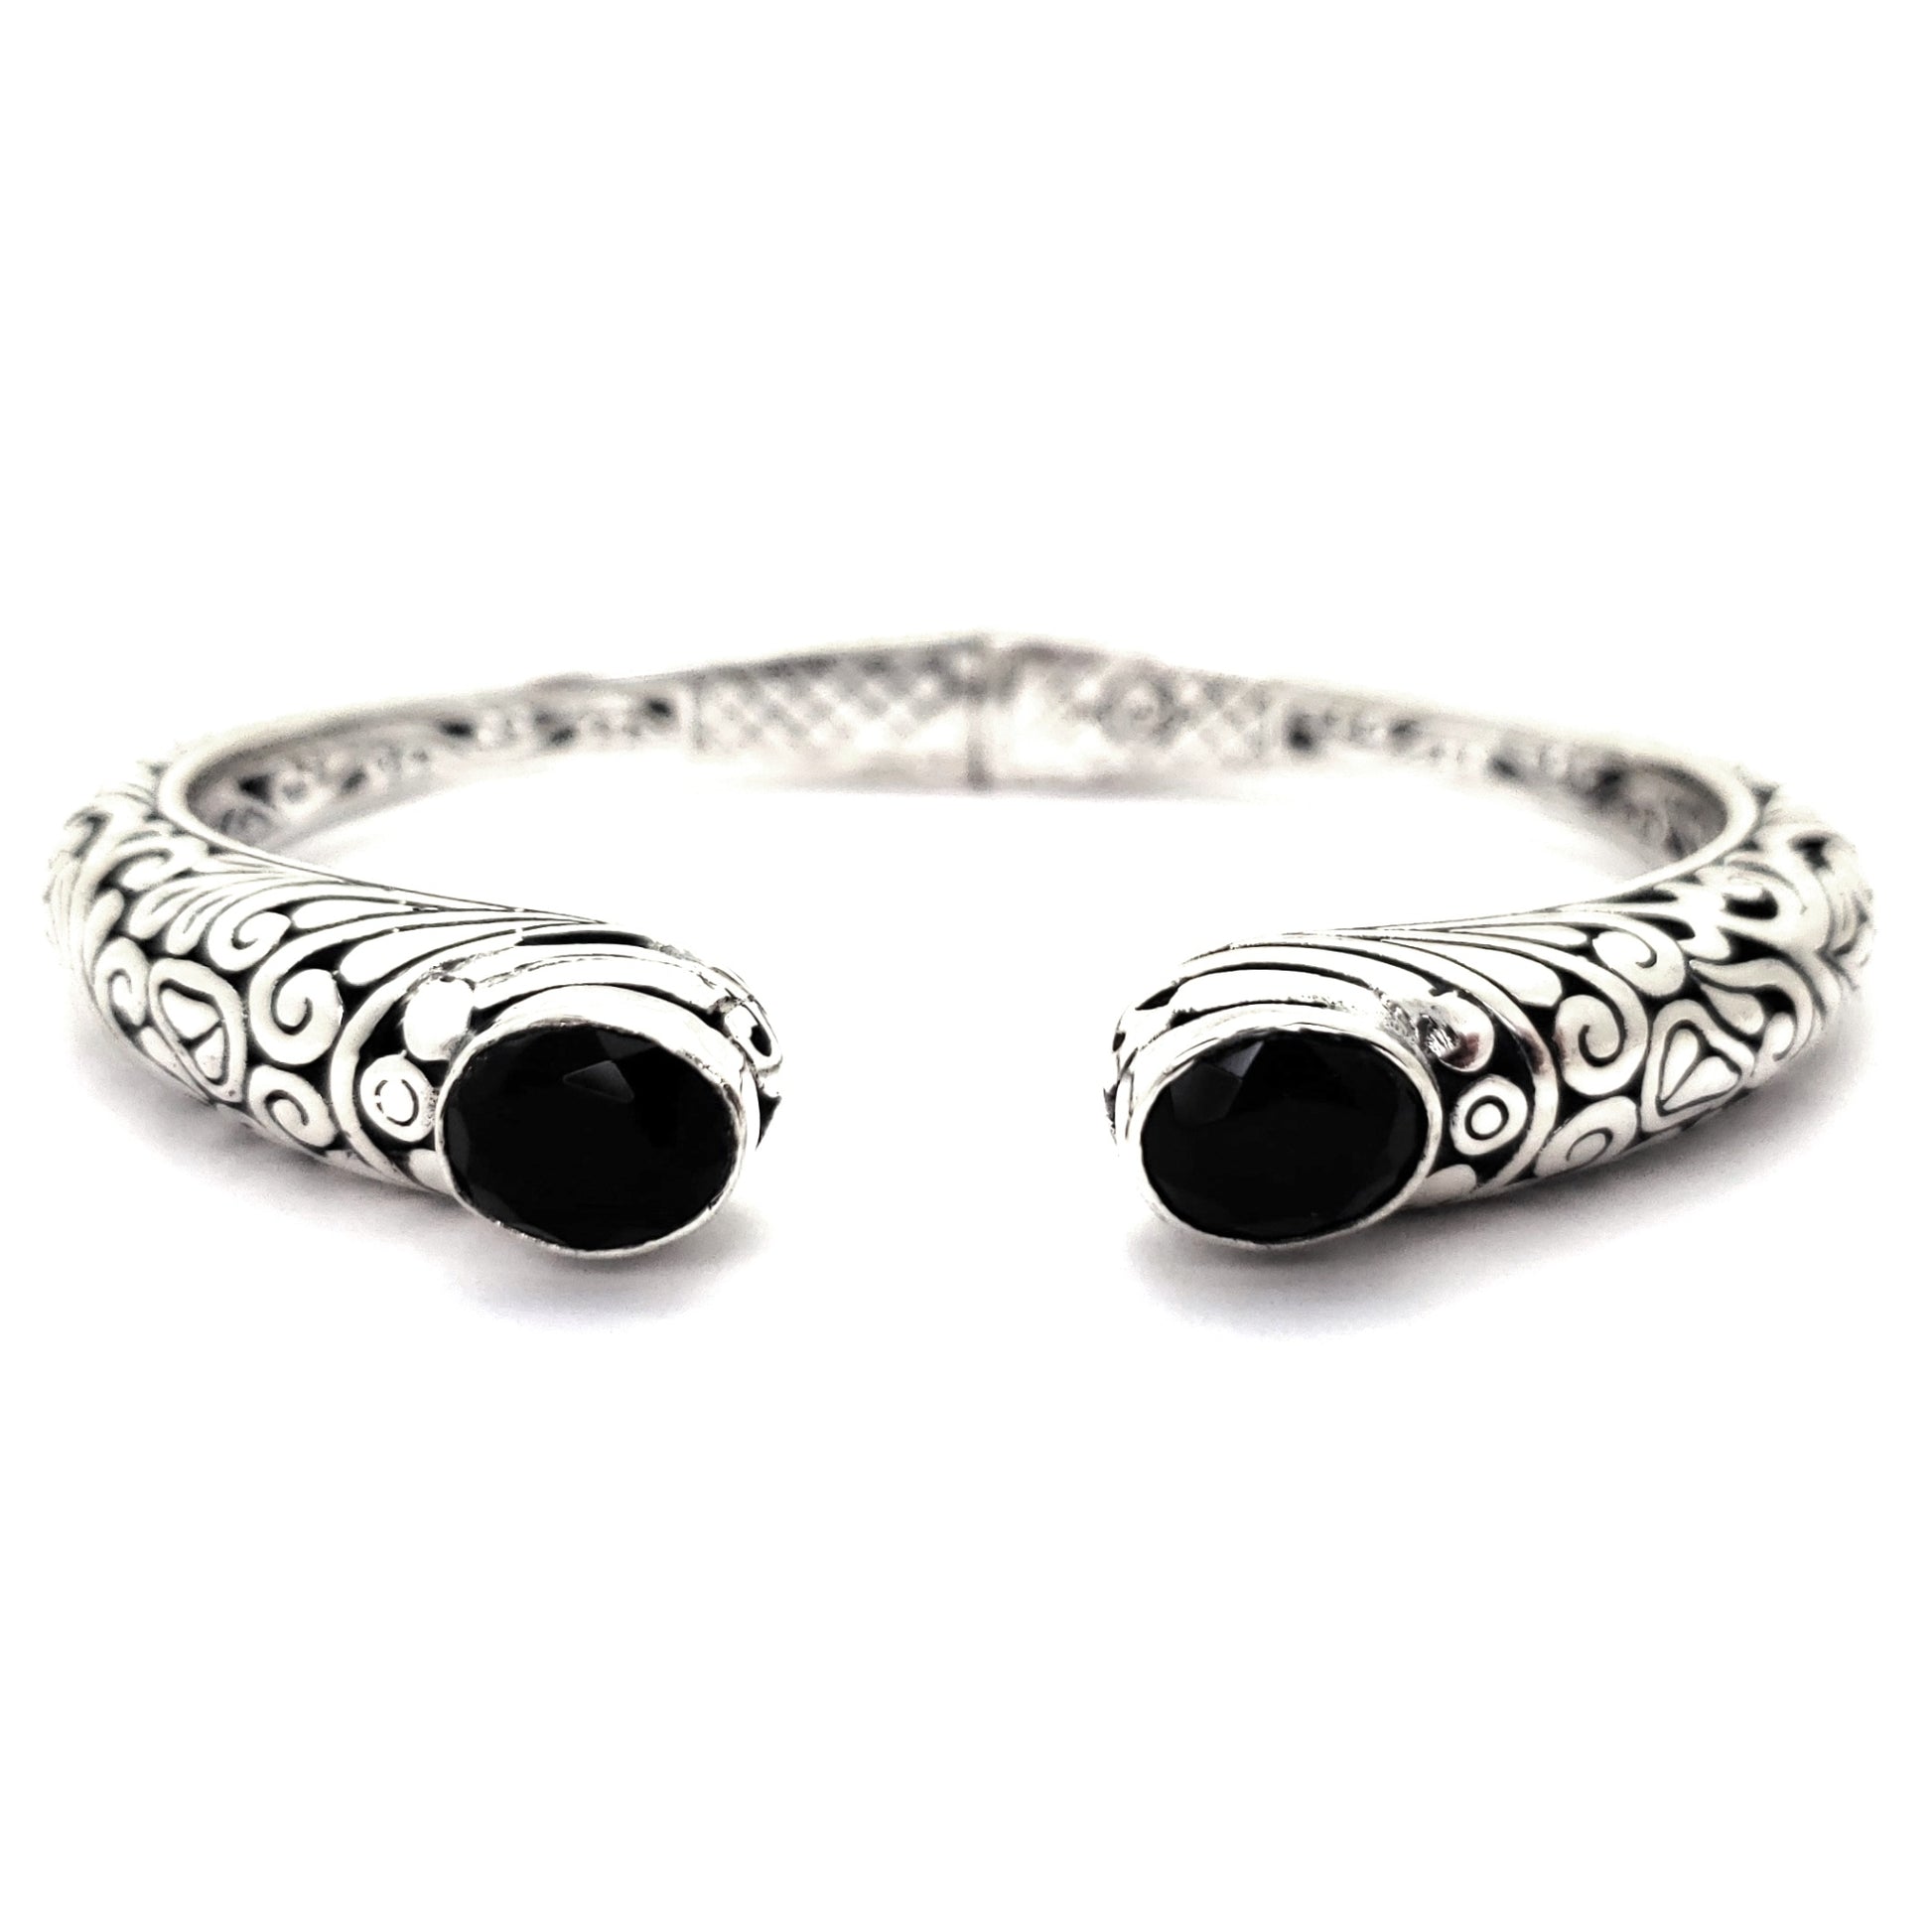 Hinged silver cuff bracelet with carved filigree design and two black onyx gemstones.